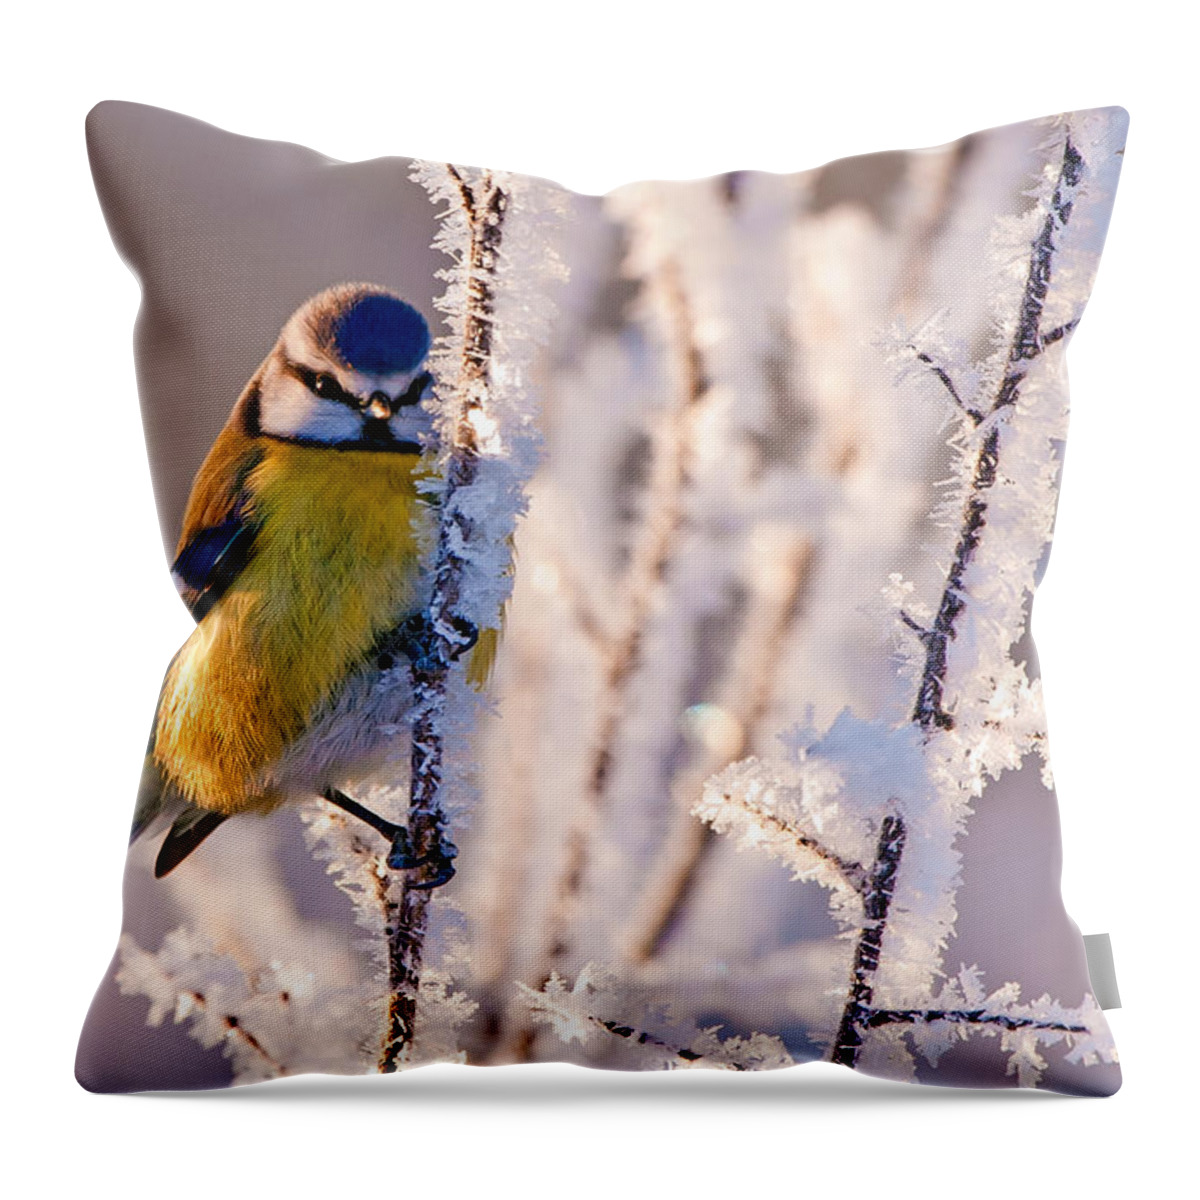 Frosty Blue Tit Throw Pillow featuring the photograph Frosty Blue Tit by Torbjorn Swenelius